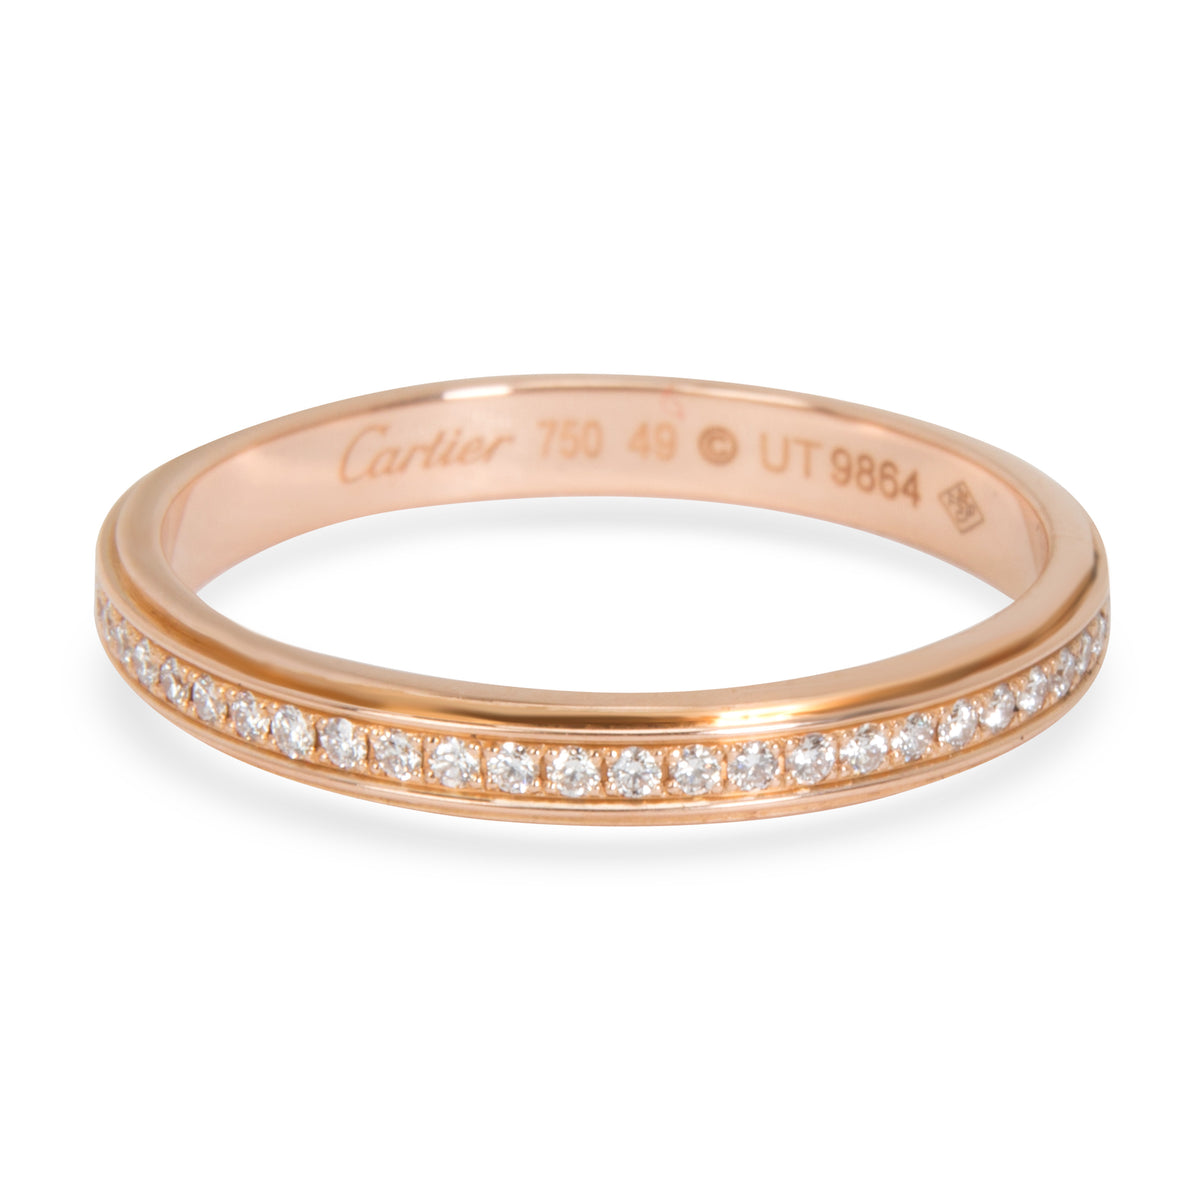 Cartier Micro Pave 2.3mm Diamond Band in 18K Rose Gold 0.15 CTW